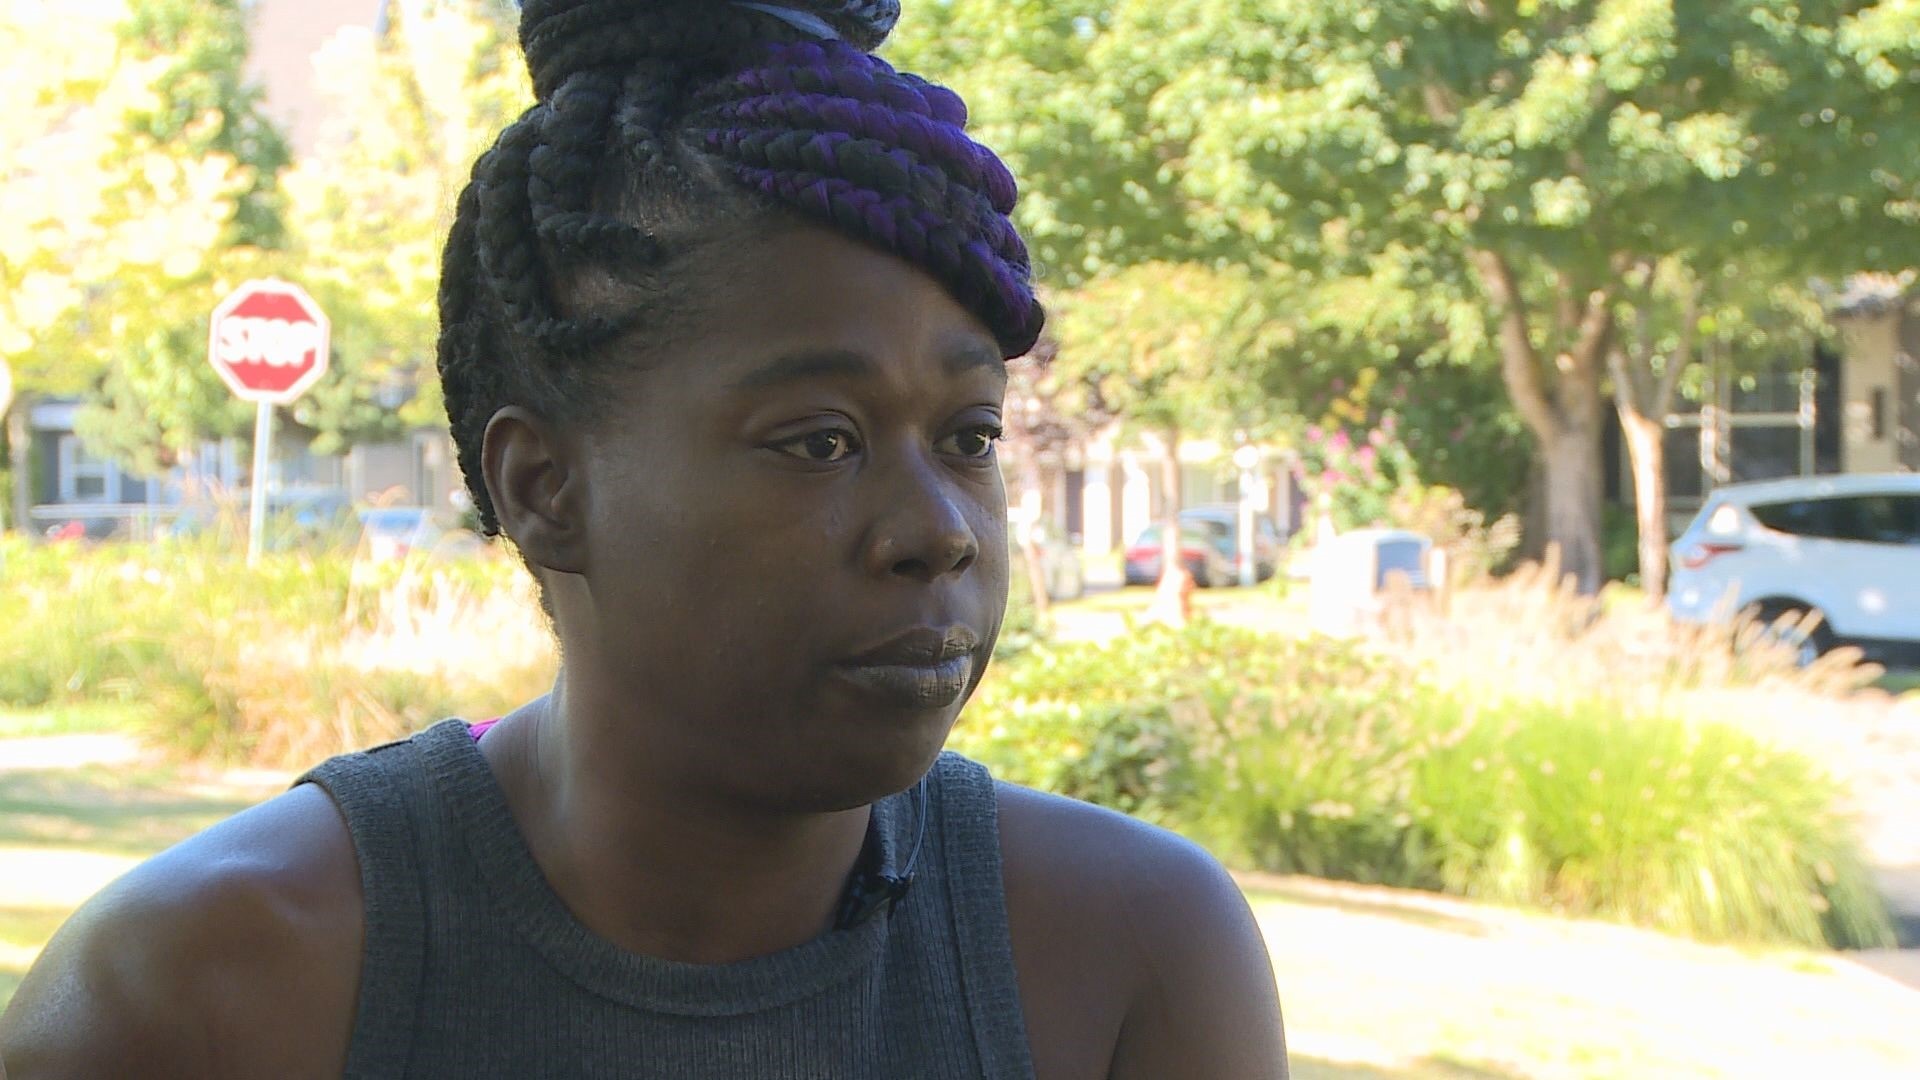 The Portland mom worries thefts will only get worse as police responses vary.